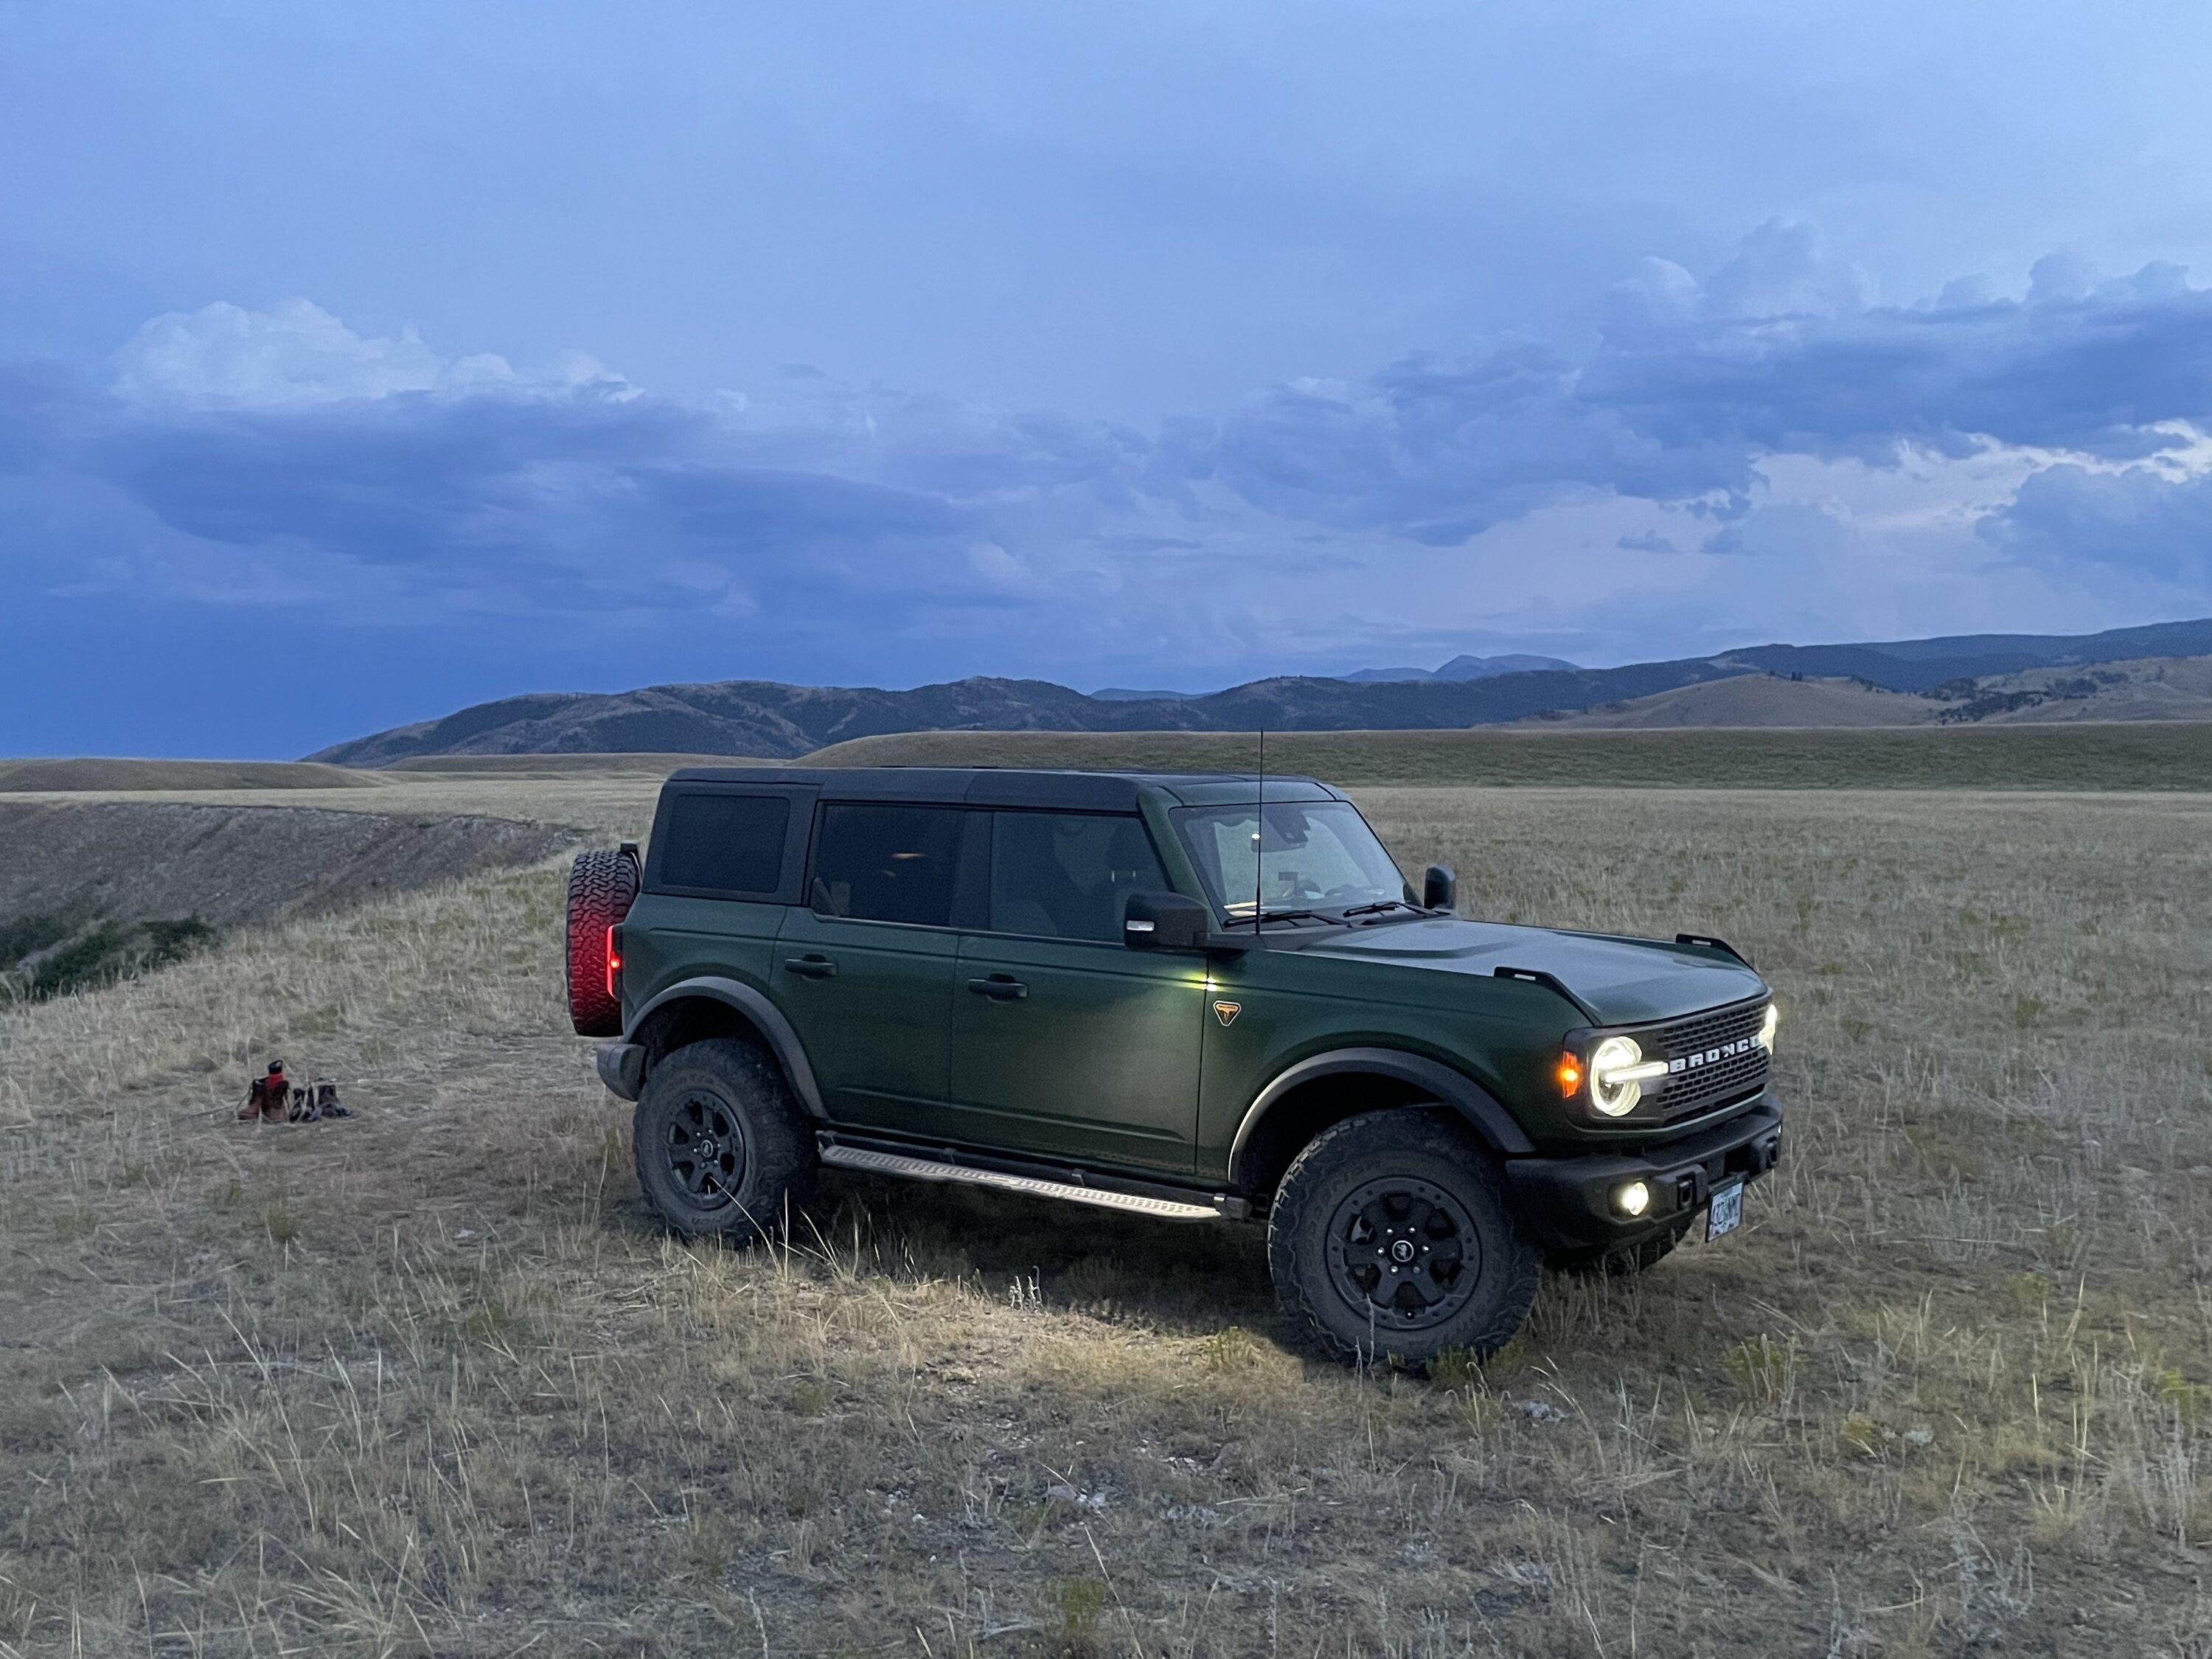 Ford Bronco First road trip for my BL from Portland, OR to Ennis, MT 8D718FE3-1997-4D5A-99D5-C0B55525ABB9